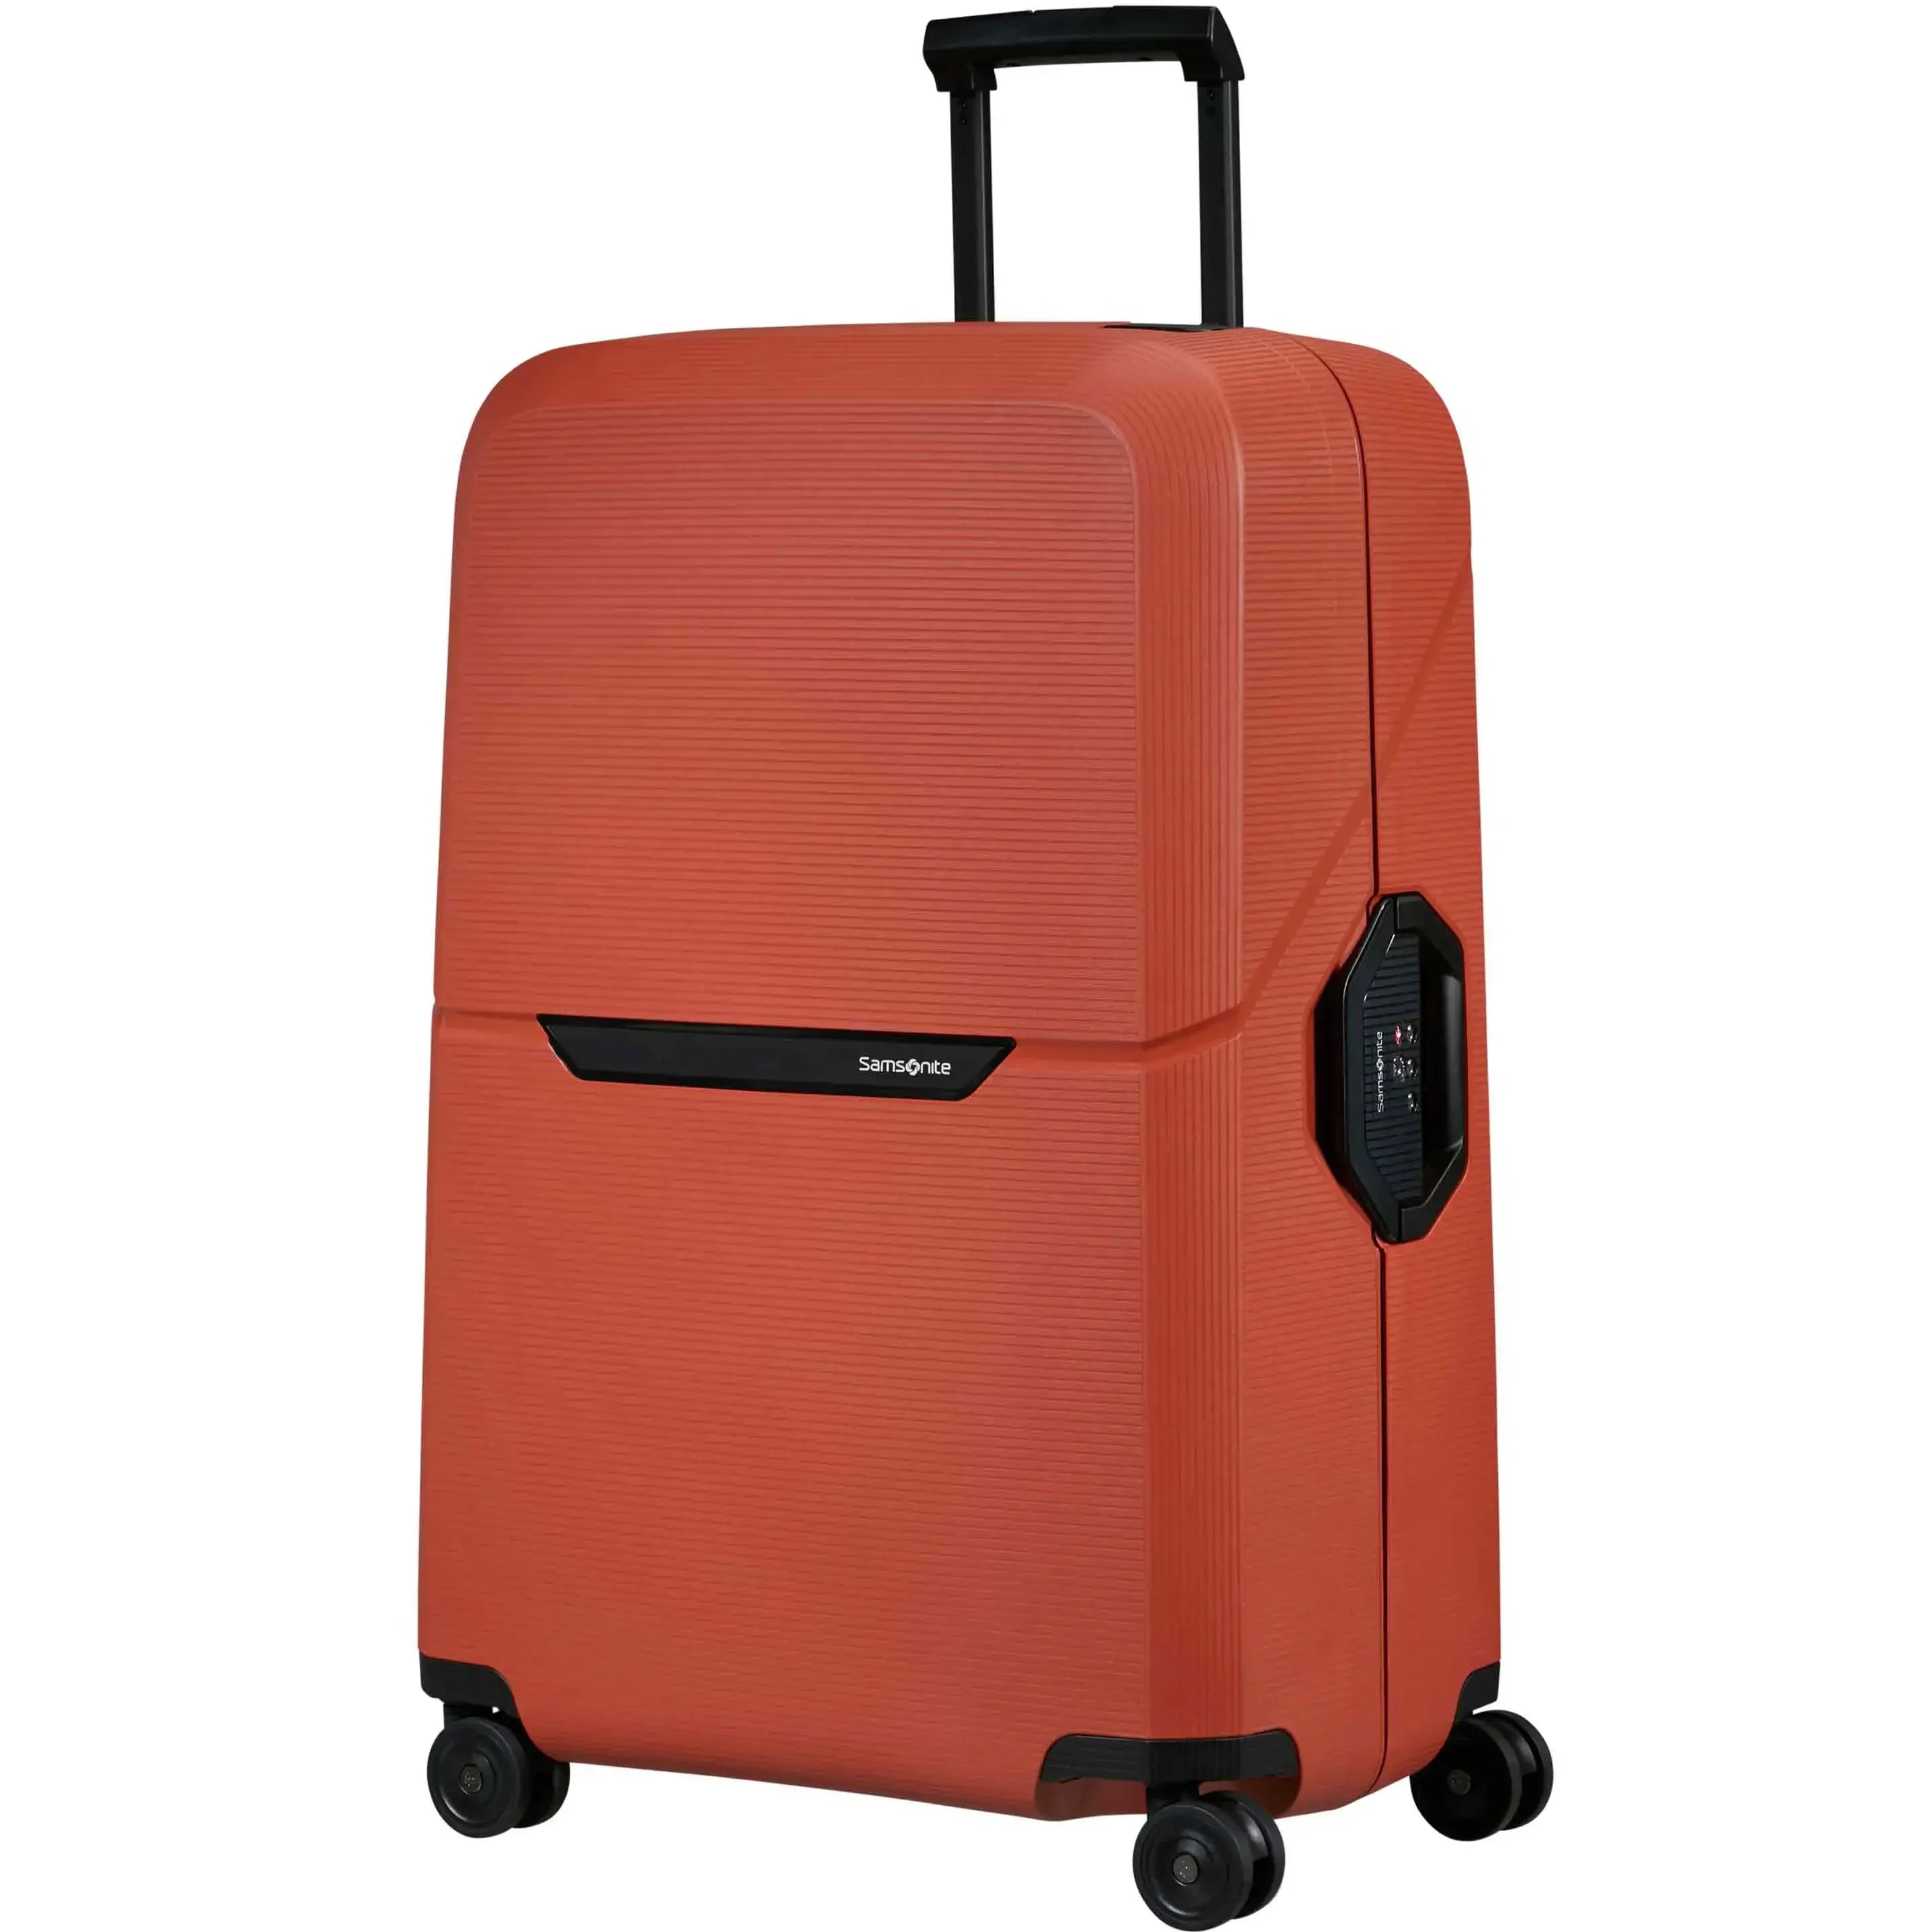 The perfect solution for Samsonite trolleys Page – requirements 2 from all 